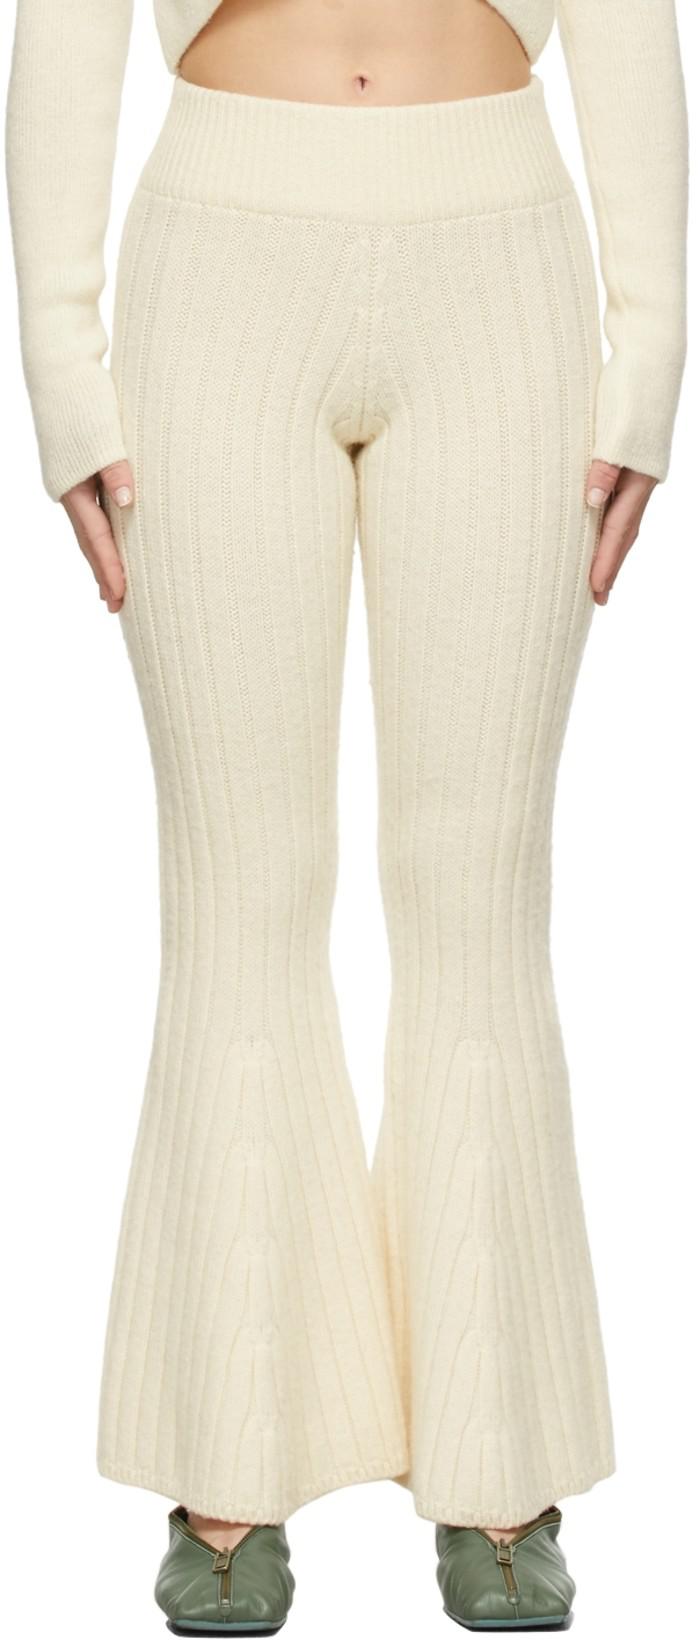 Off-White Flared Knit Pants by DETERM;